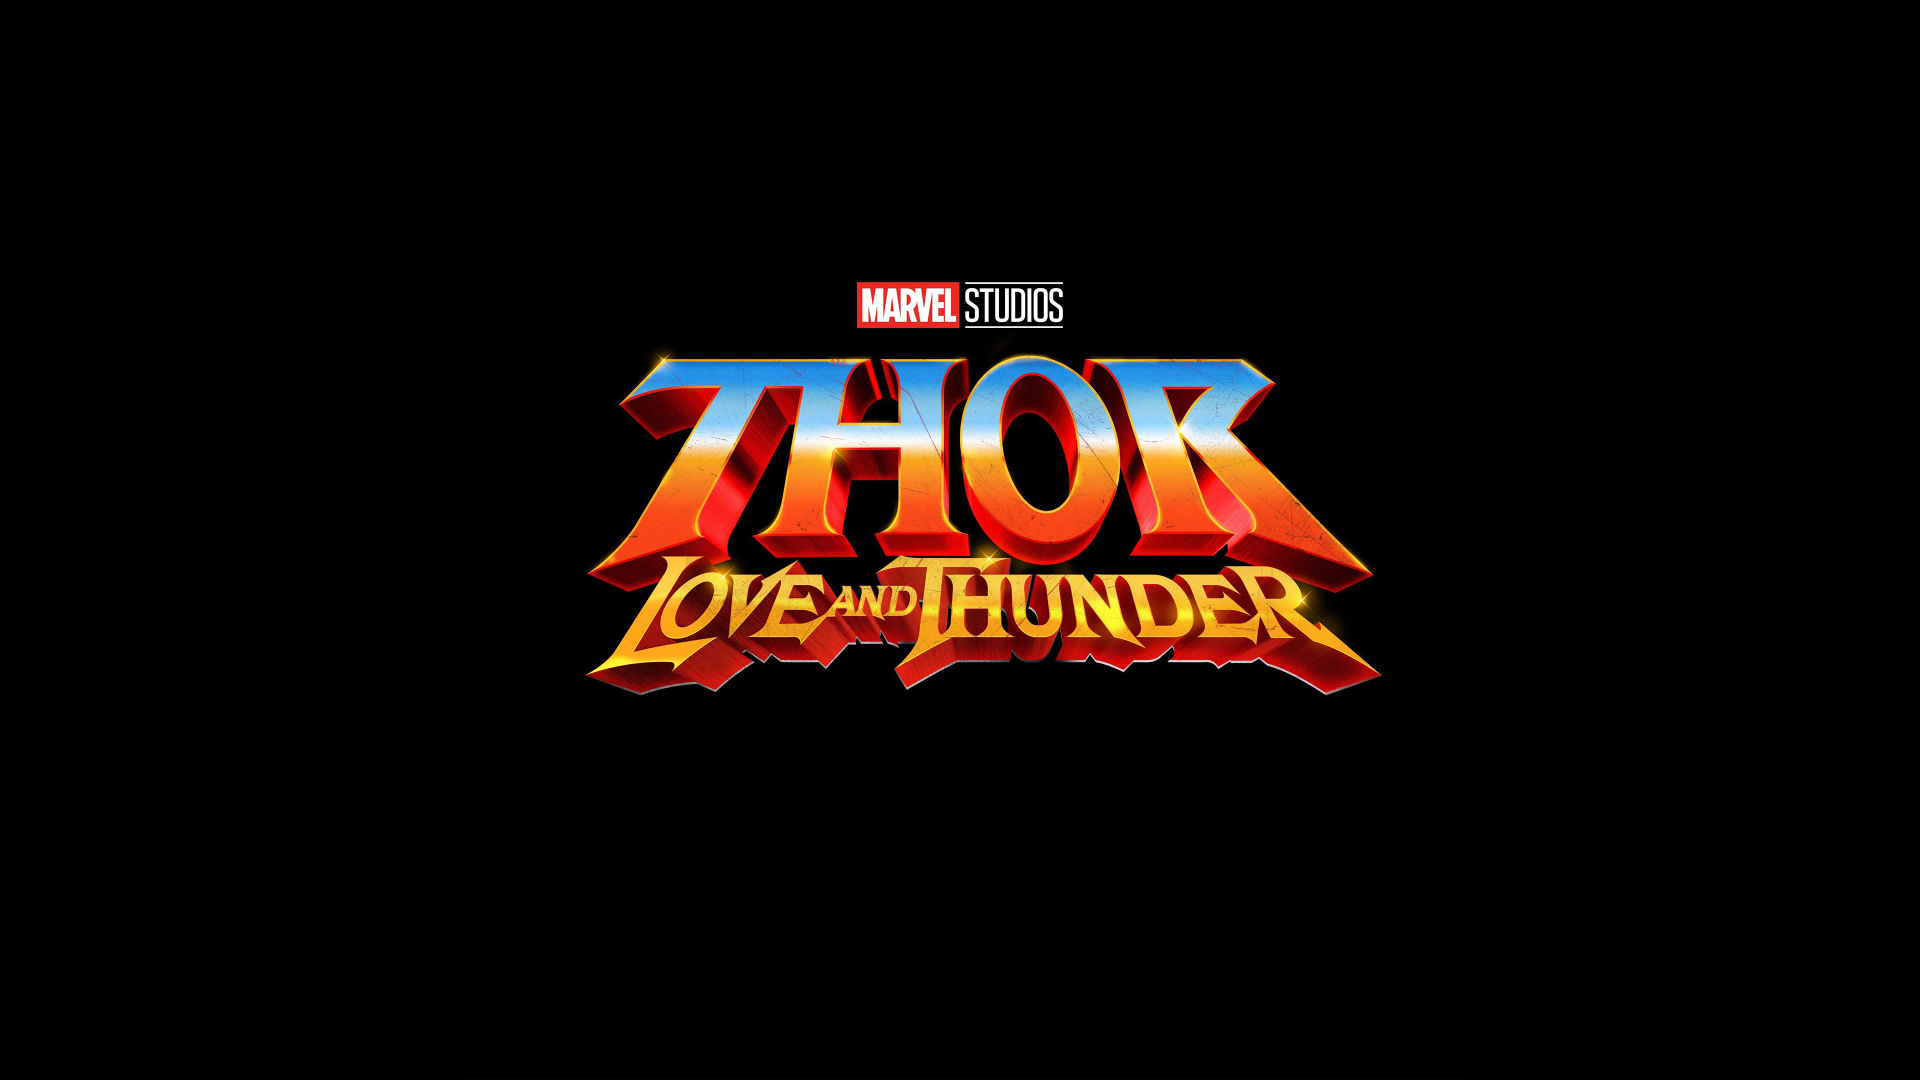 Thor: Love and Thunder movie poster, 2021